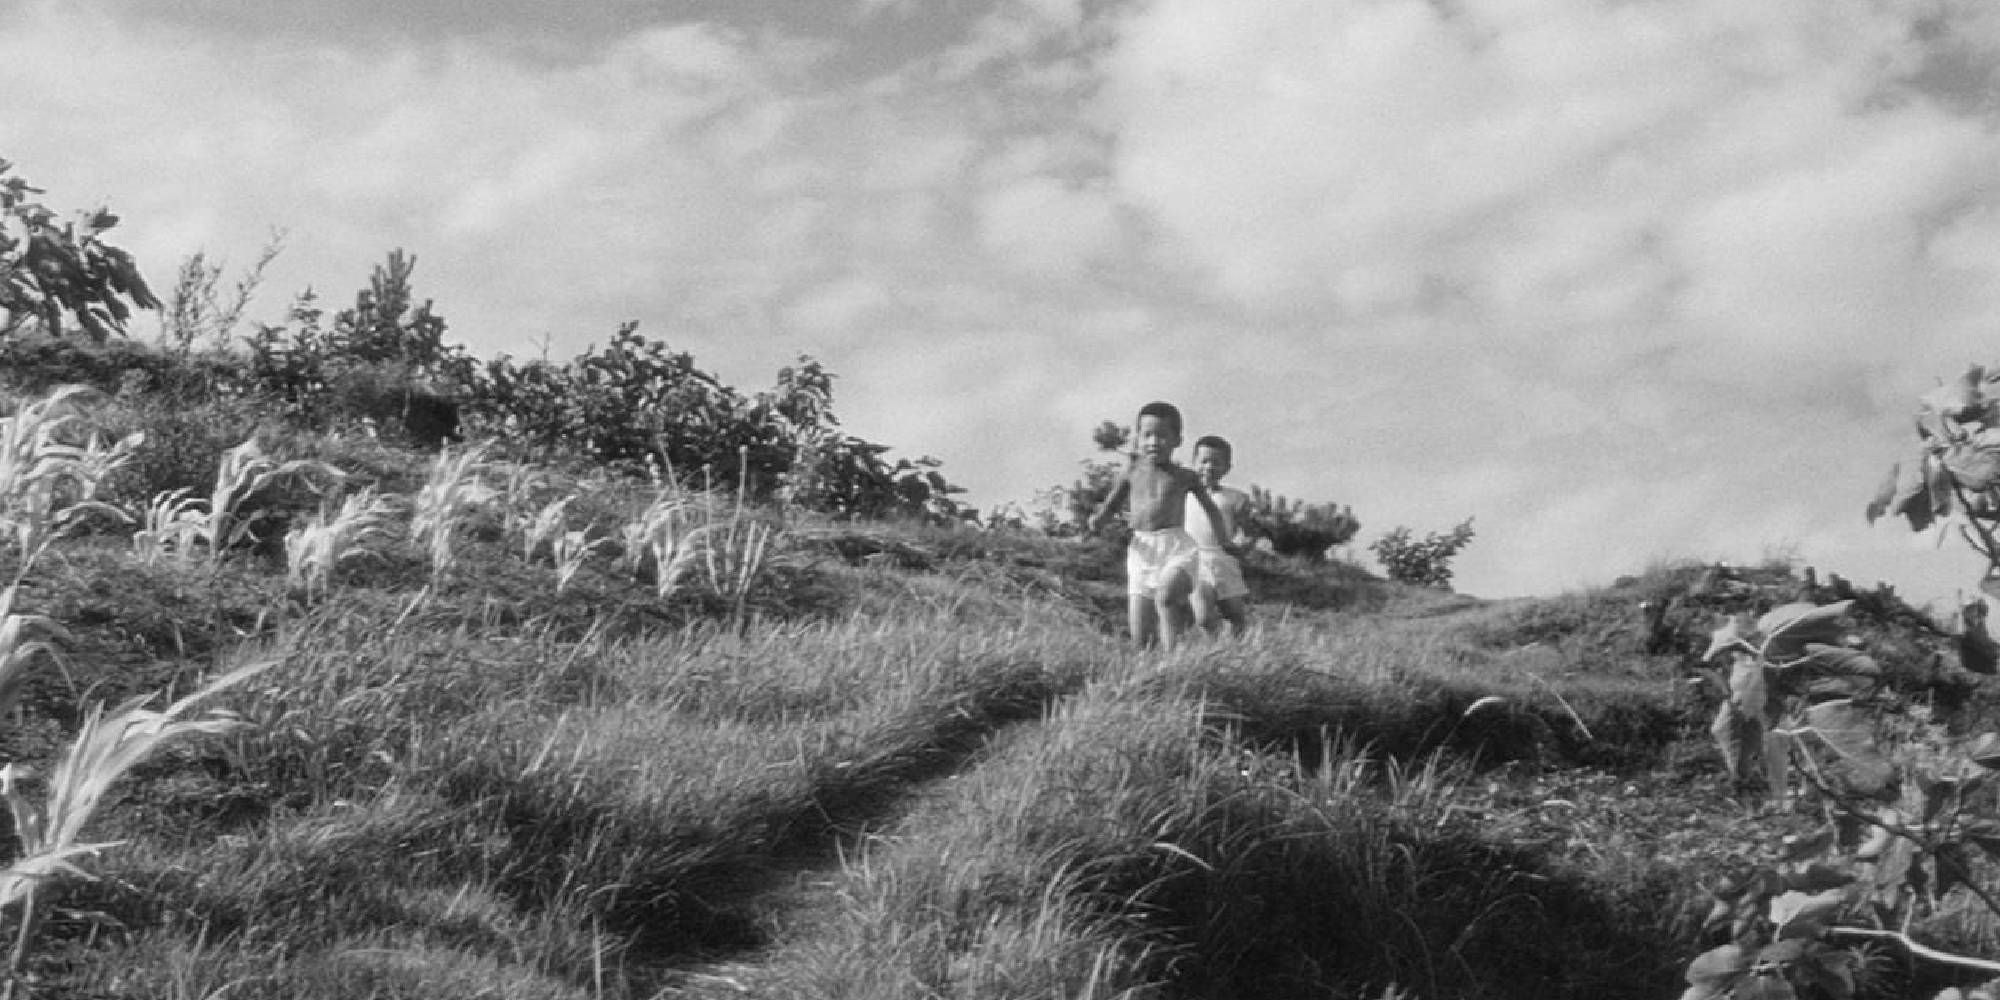 Two kids walking in the country in The Naked Island.